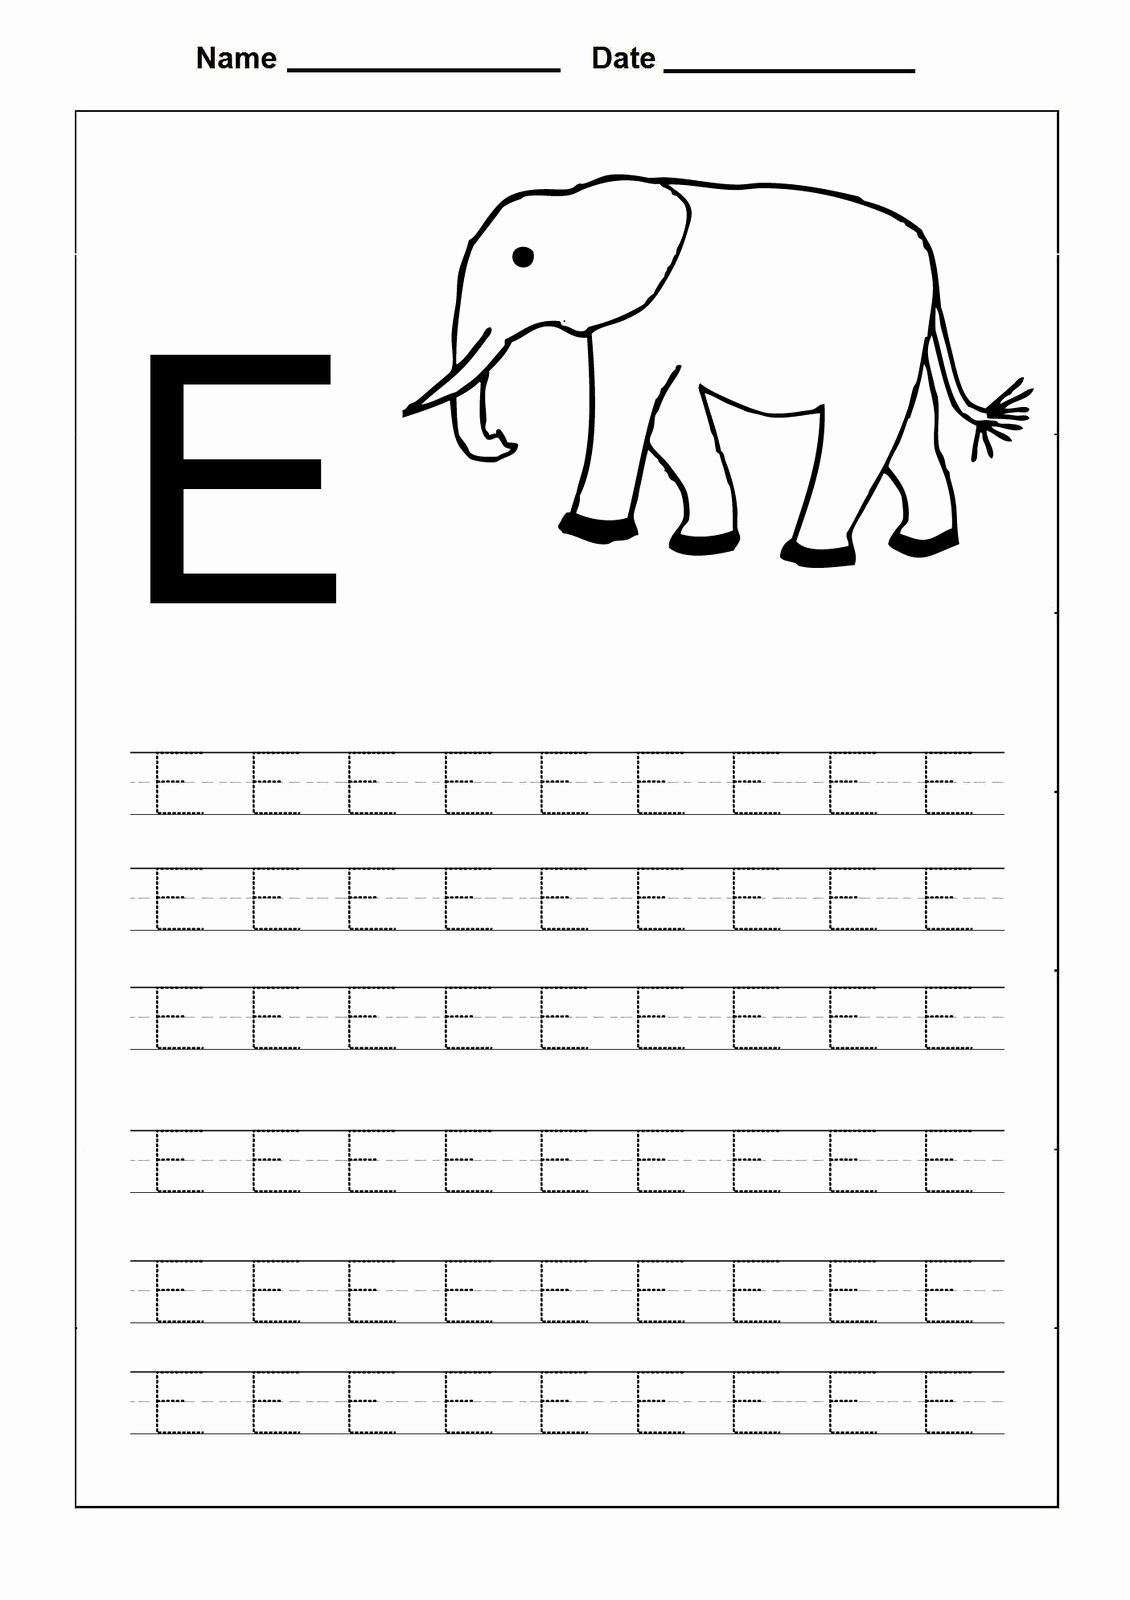 Coloring Capital Letters Print In 2020 | Letter E Worksheets with regard to Letter E Worksheets Pdf